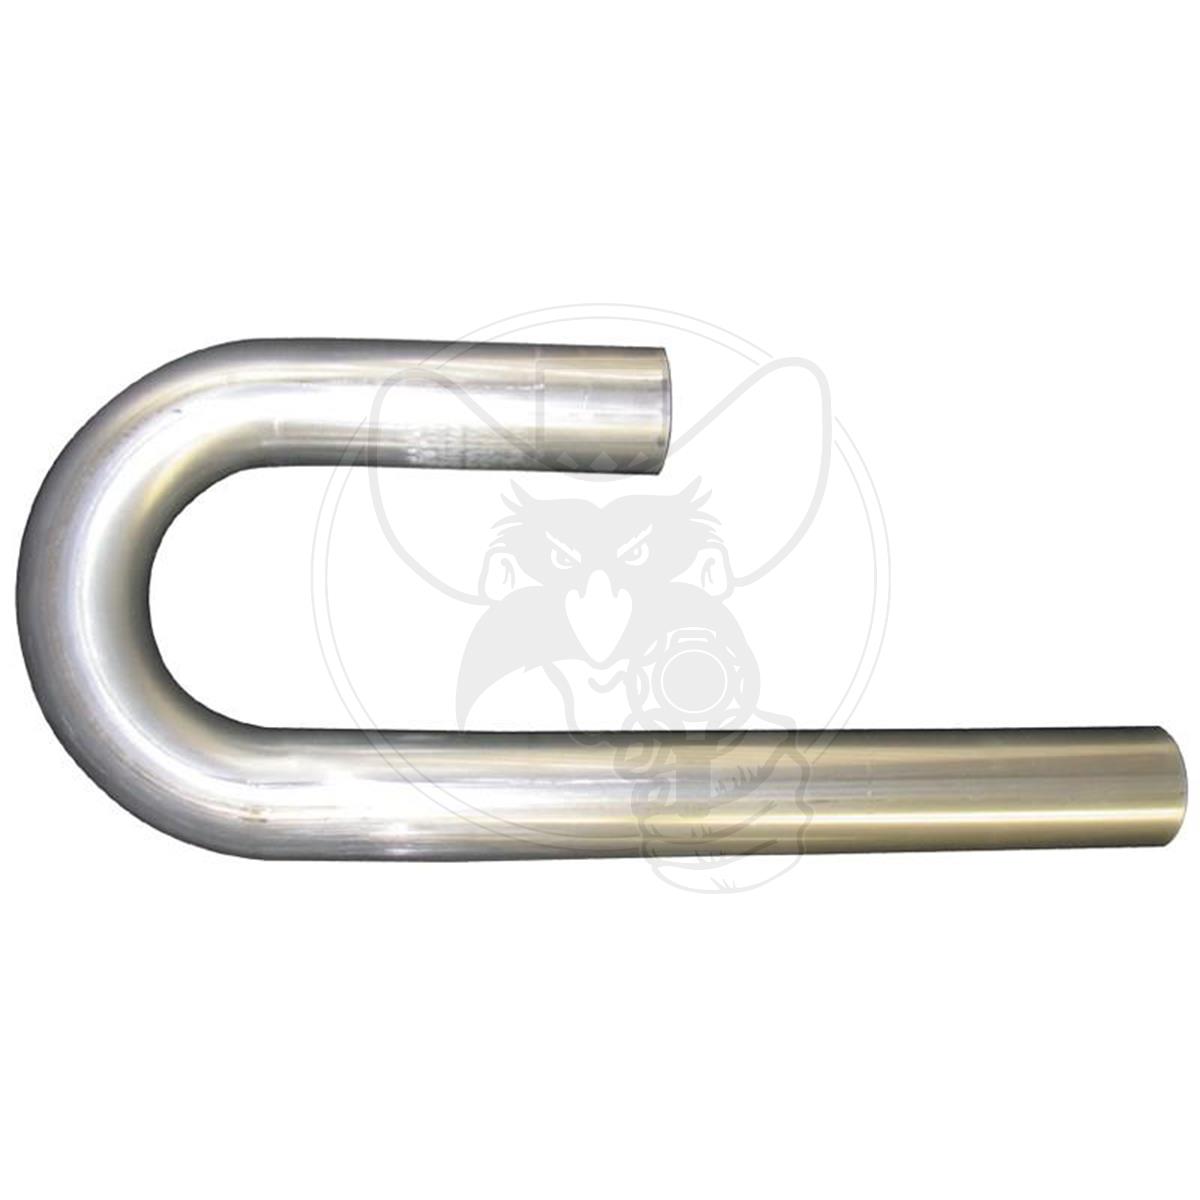 AEROFLOW 180° Stainless J-Bend Tubing 1-7/8 OD WITH 6" & 12" LEGS